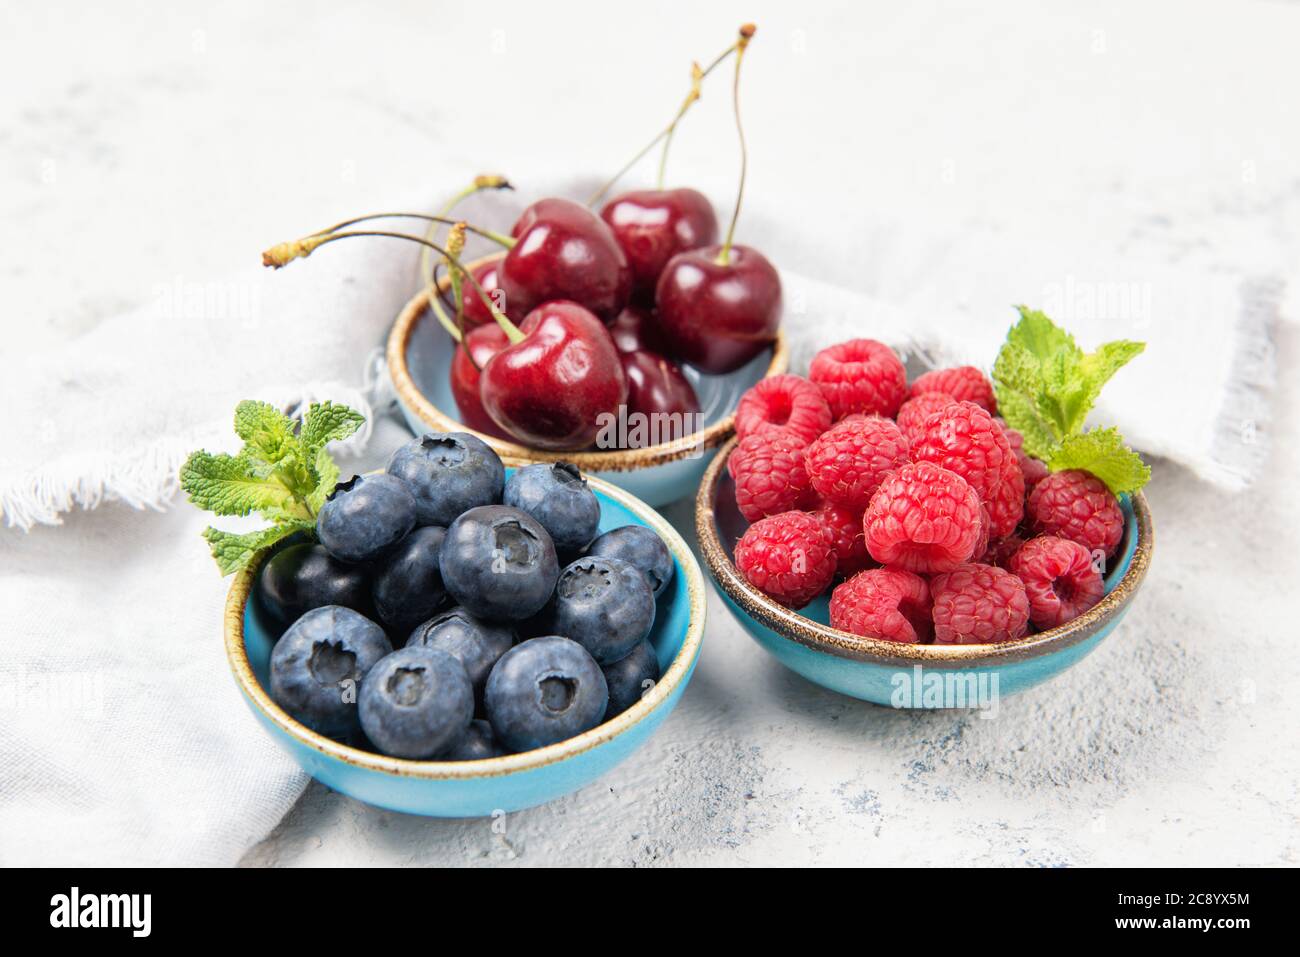 Assorted fresh juicy summer berries. Cherry, blueberry and raspberry in ceramic bowls, healthy snack concept. Stock Photo